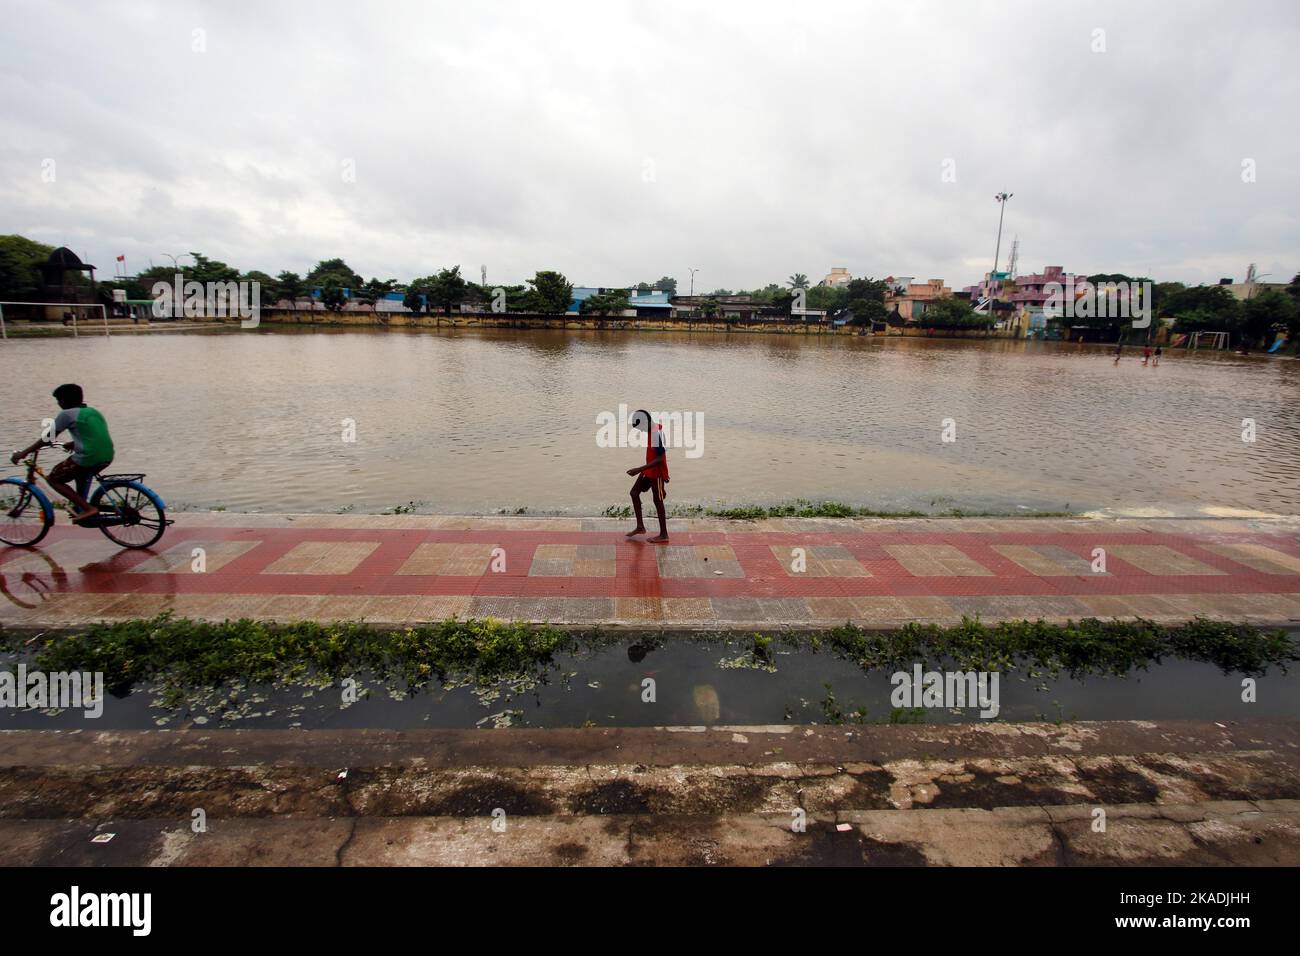 (221102) -- CHENNAI, Nov. 2, 2022 (Xinhua) -- People pass by a sport ground submerged in rain water on the outskirts of Chennai city, India, Nov. 2, 2022. (Str/Xinhua) Stock Photo